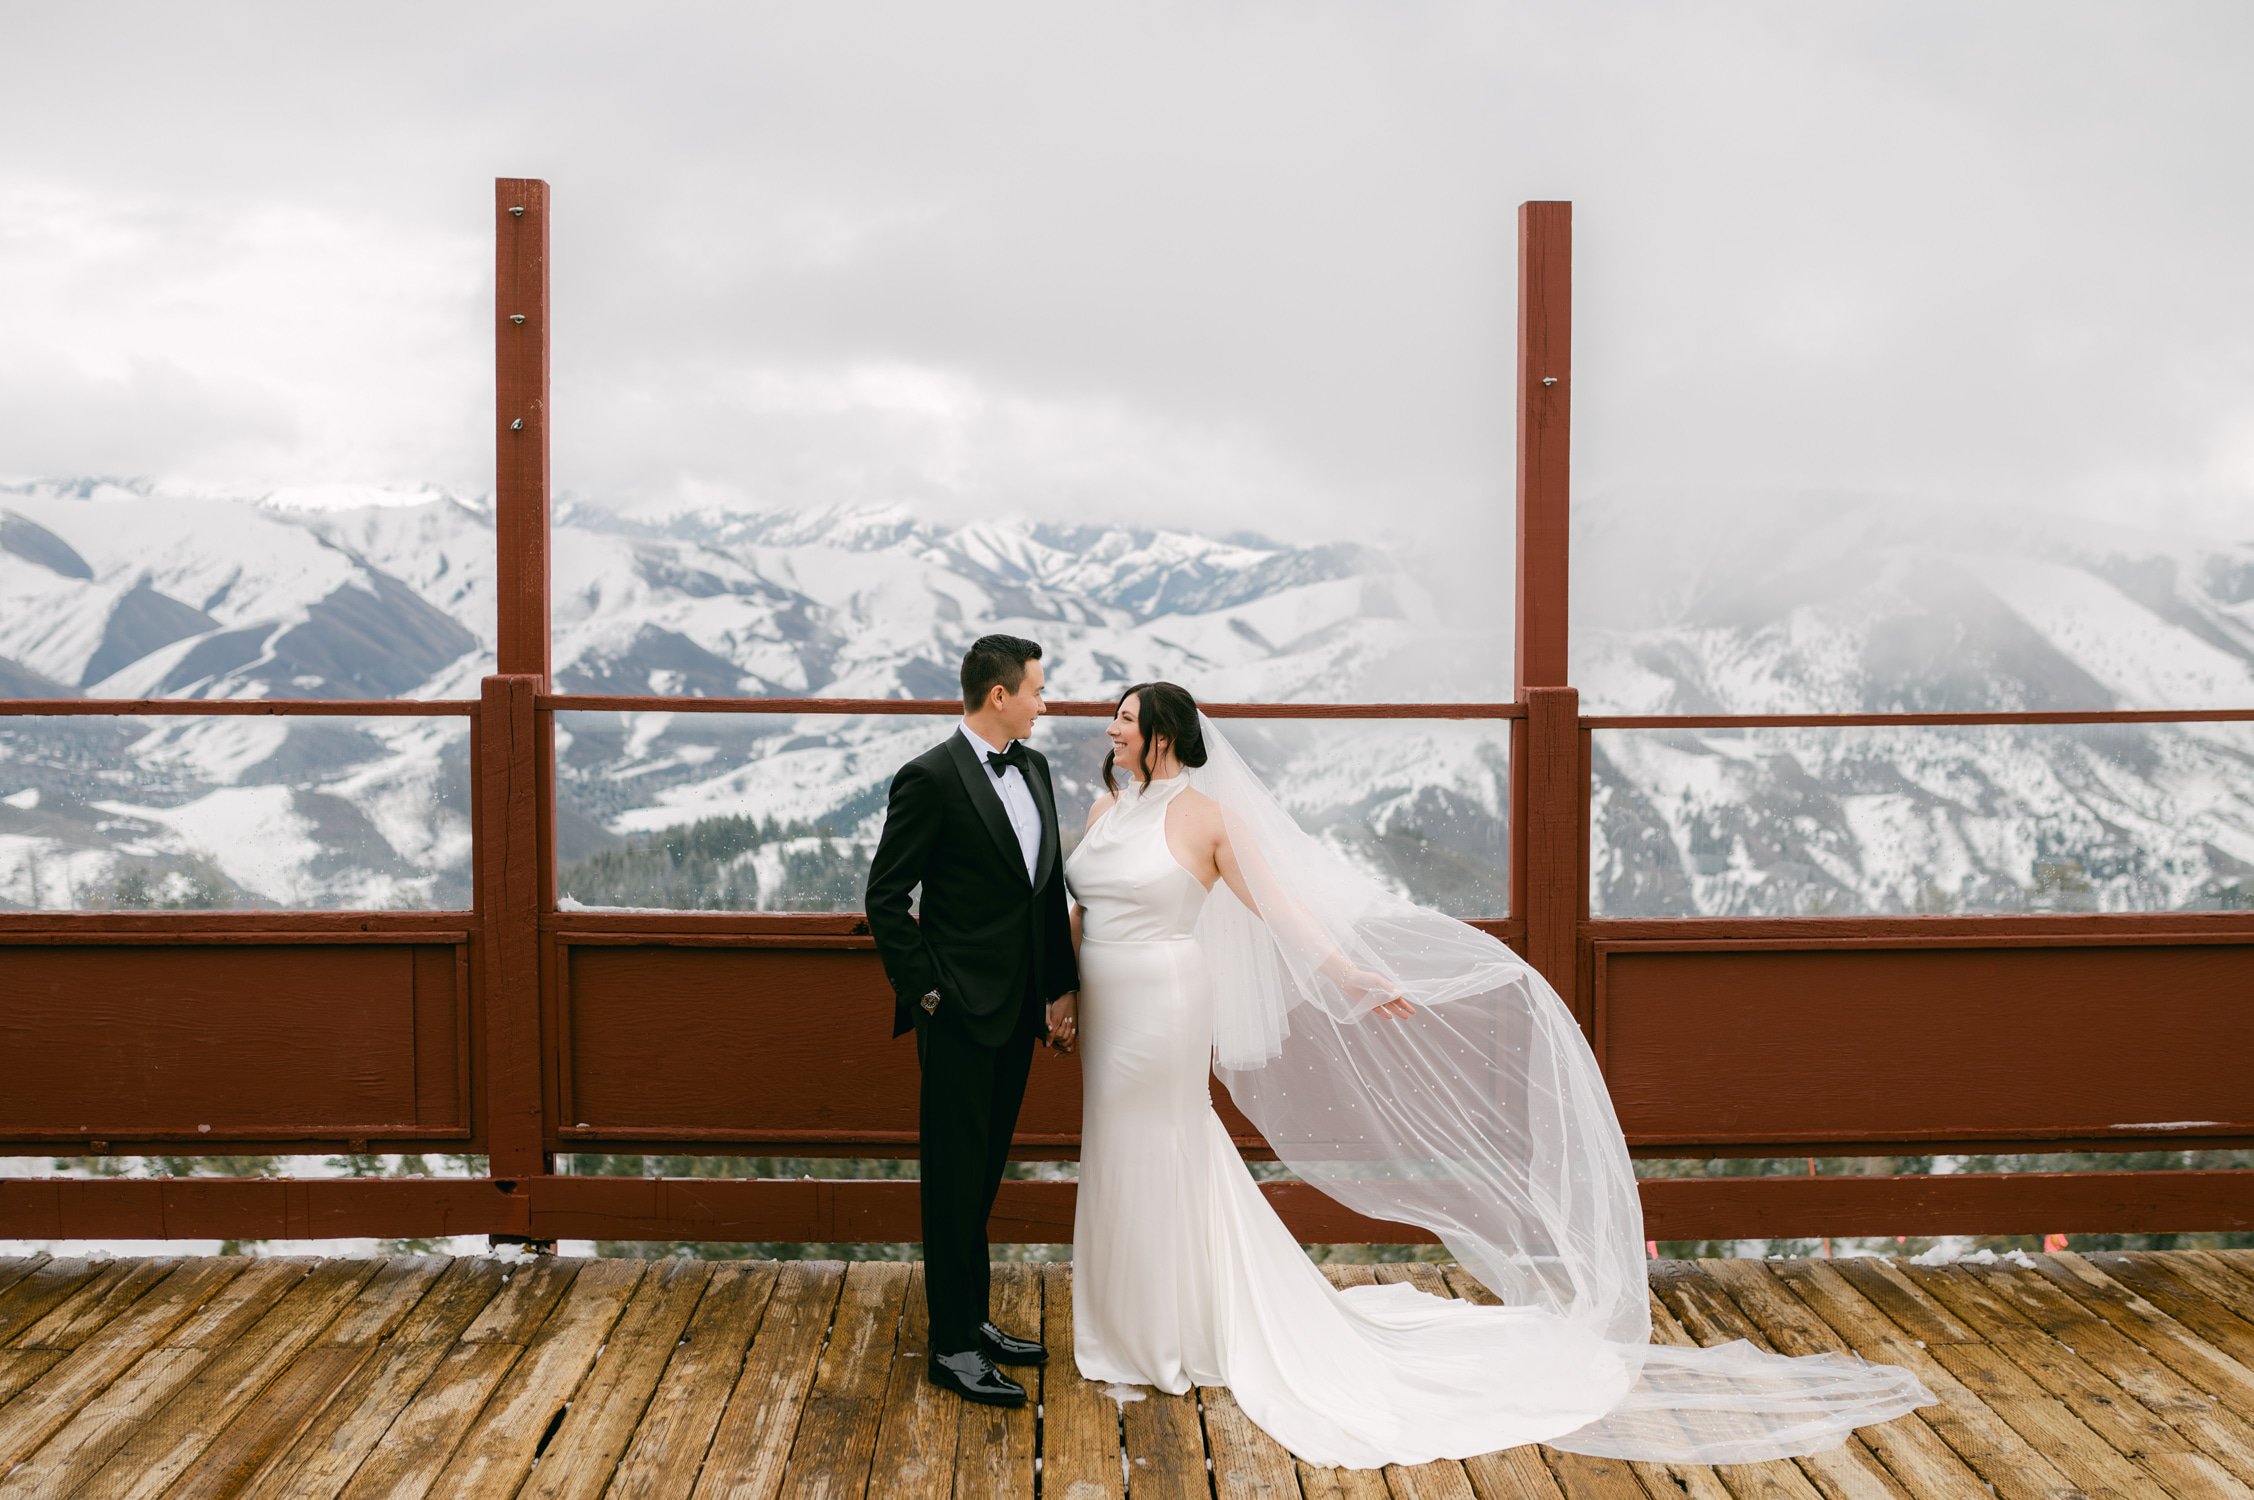 Sun Valley Roundhouse Wedding photos of the bride and groom during their first look with the snowy mountains in the background